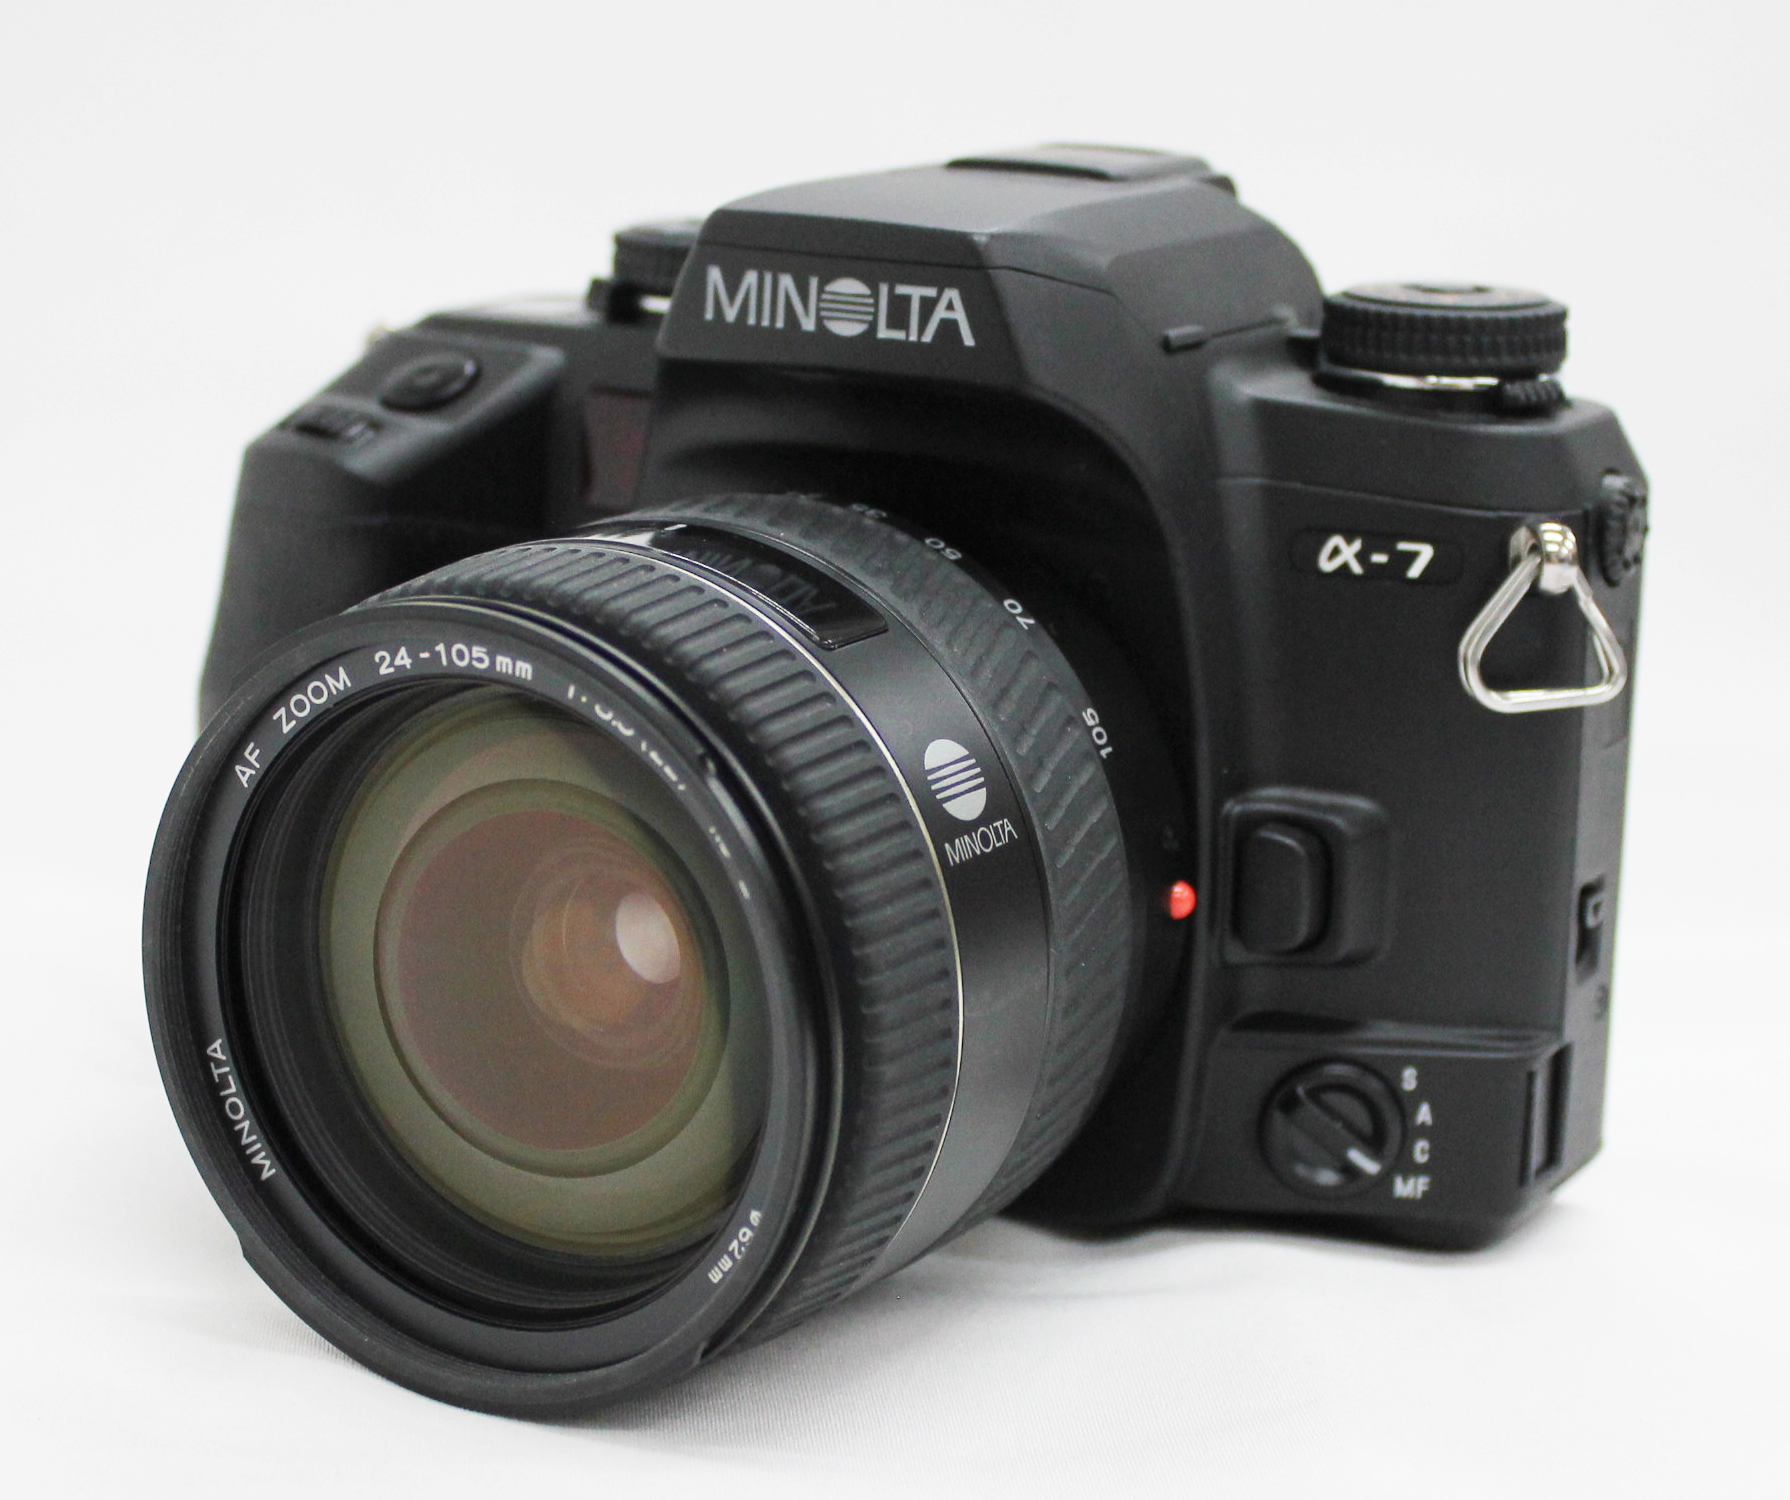 Japan Used Camera Shop | [Excellent+++++] Minolta Maxxum 7 Dynax 7 a7 with AF Zoom 24-105mm F/3.5-4.5 D from Japan